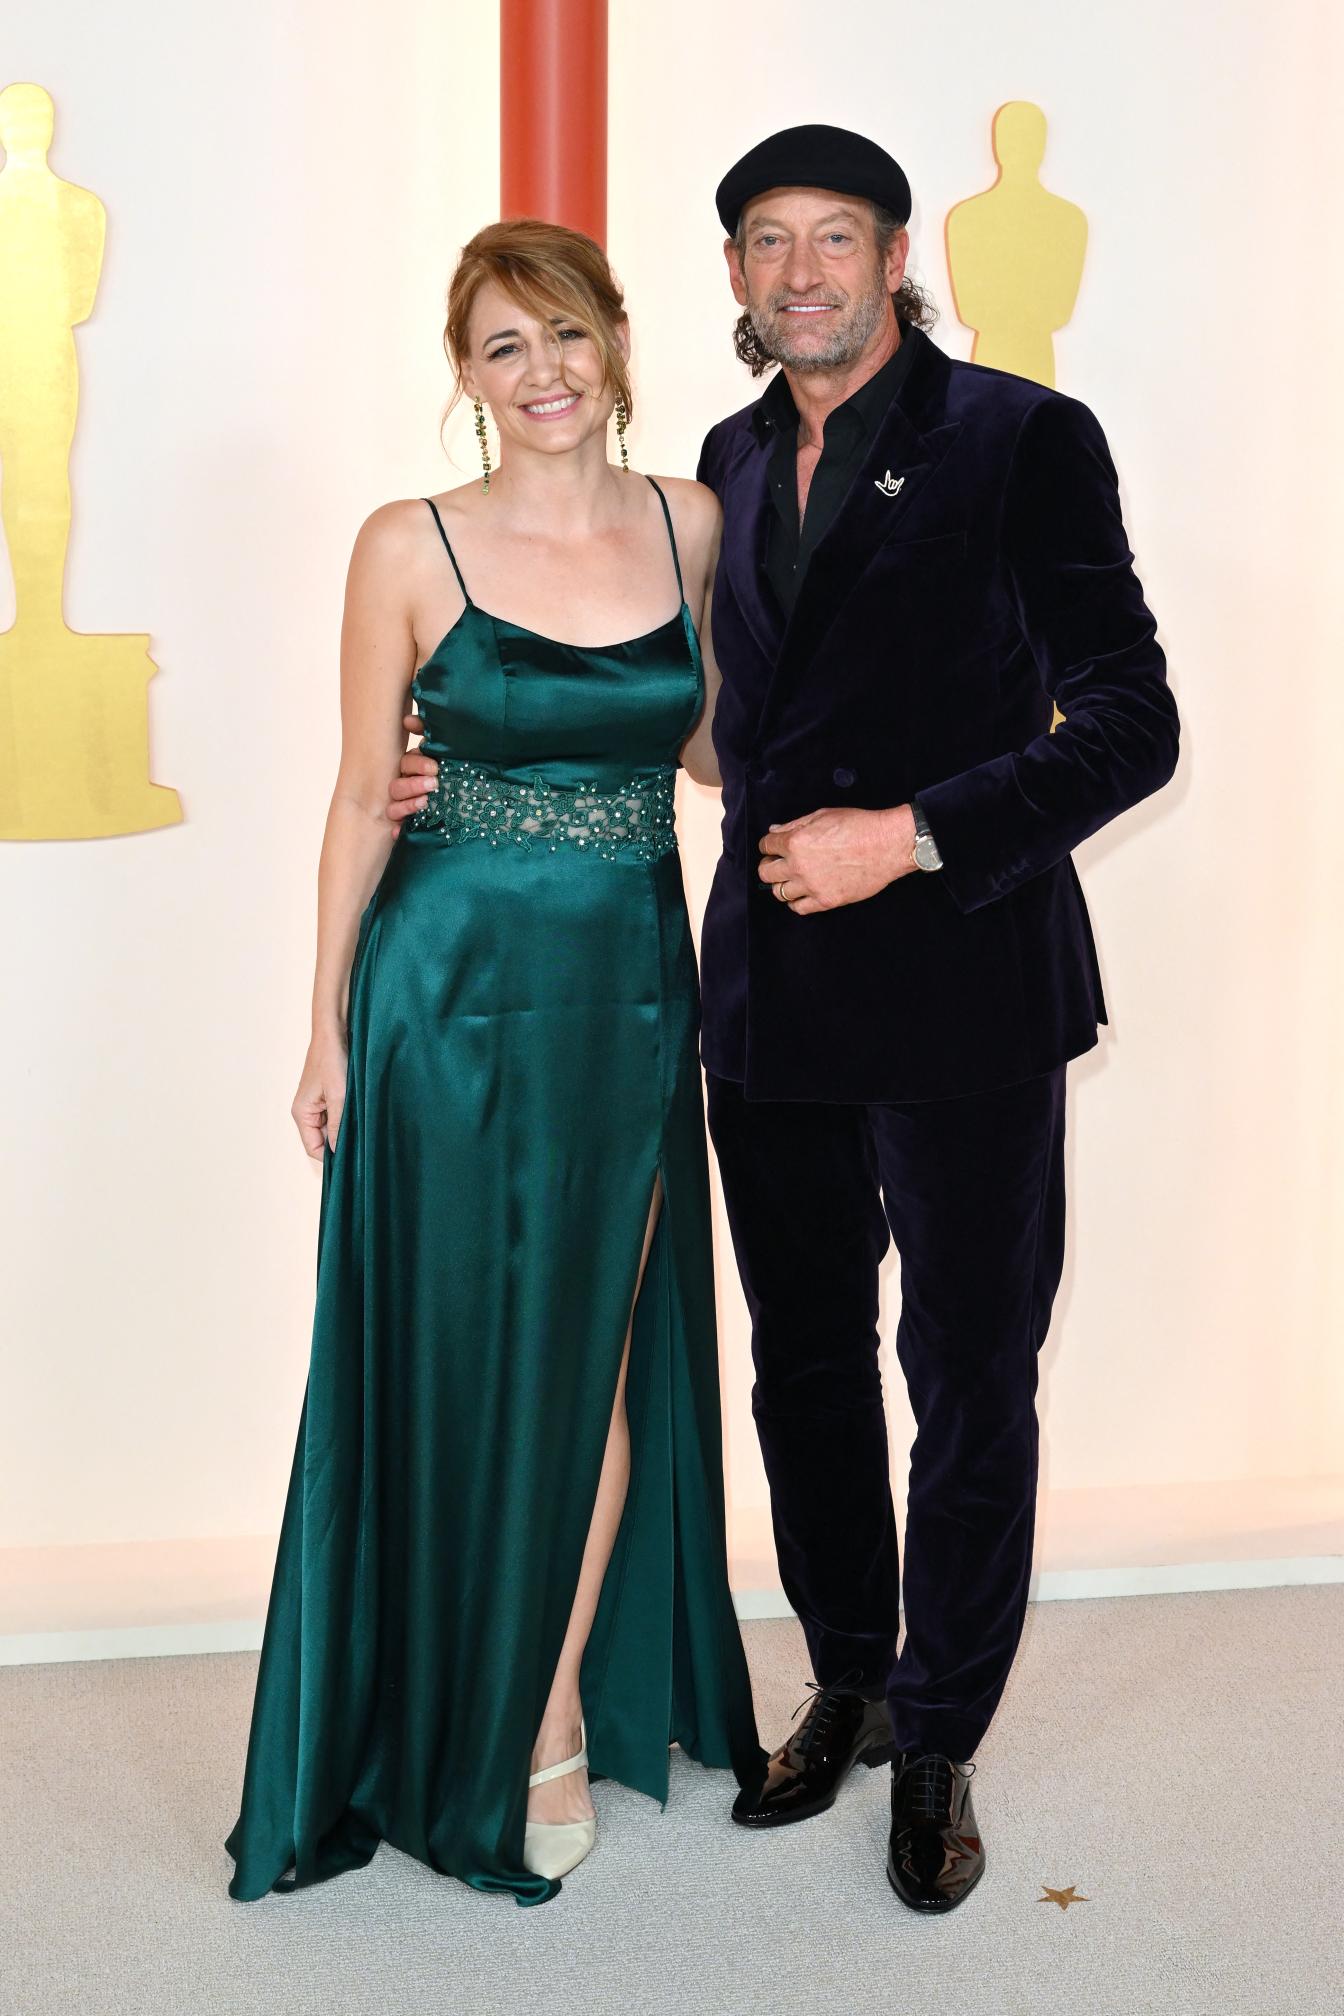 US actor Troy Kotsur and his wife Deanne Bray attend the 95th Annual Academy Awards at the Dolby Theatre in Hollywood